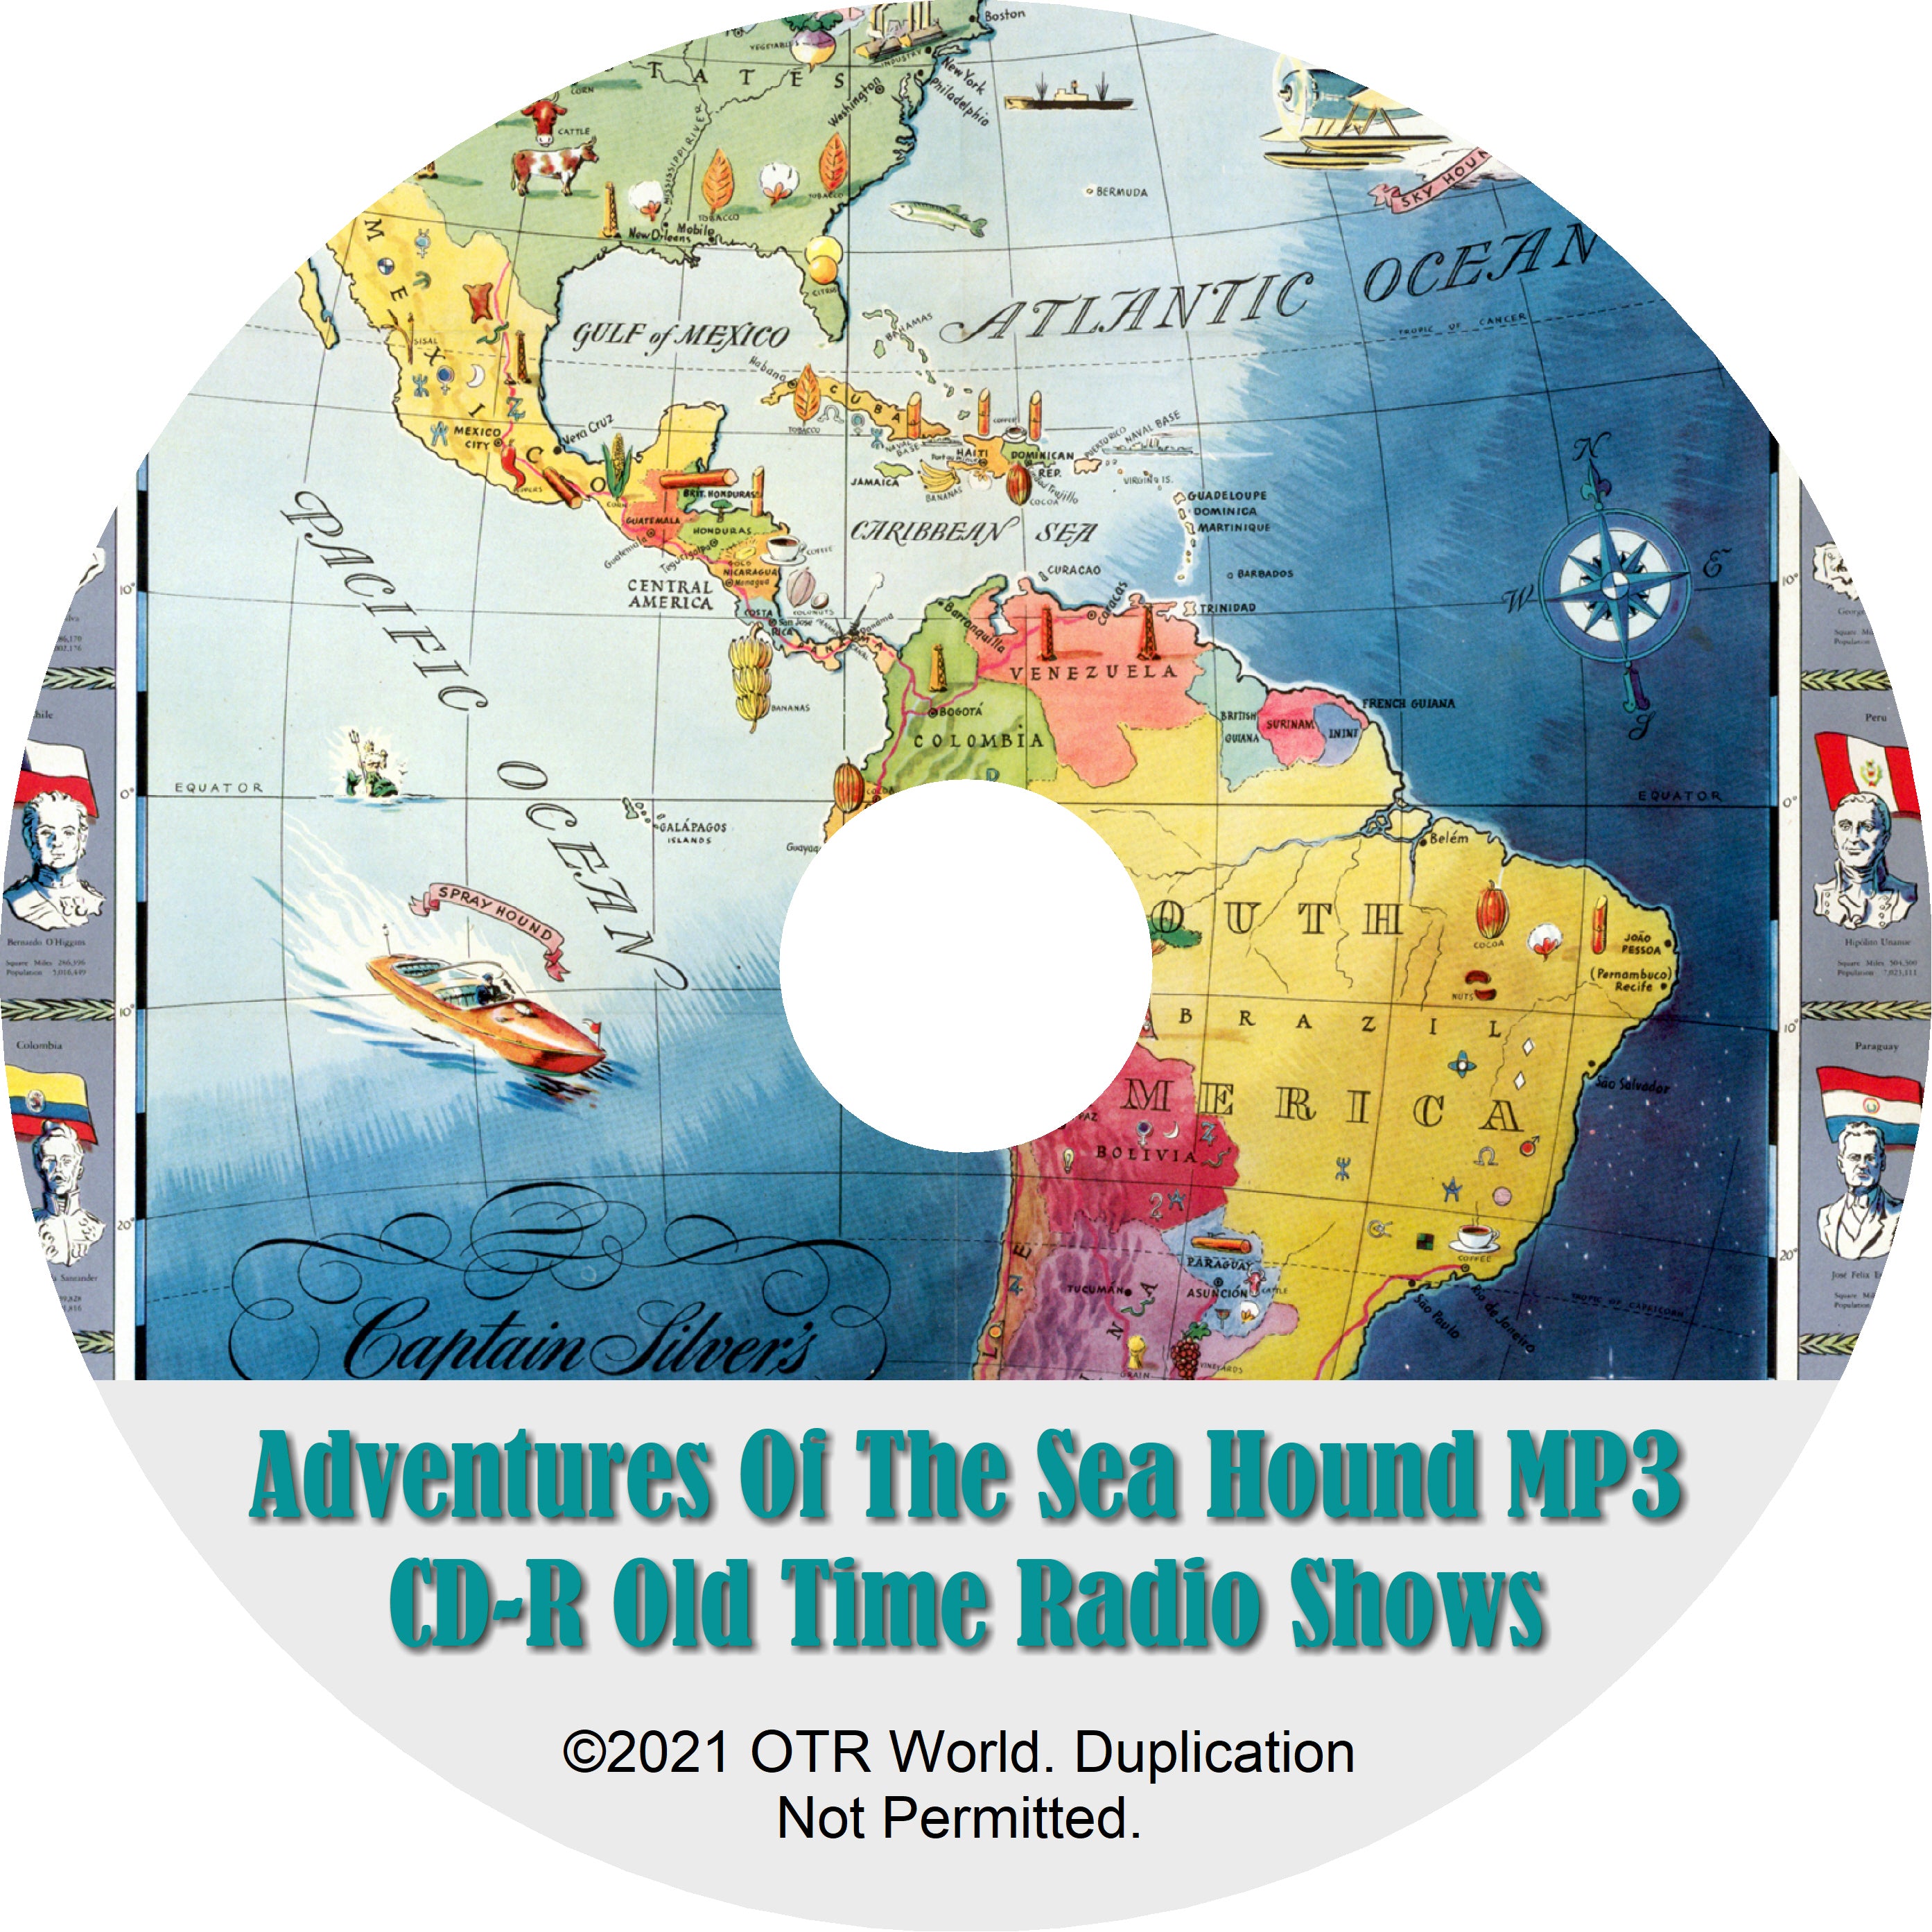 Adventures Of The Sea Hound OTRS OTR Old Time Radio Shows MP3 On CD-R 11 Episodes